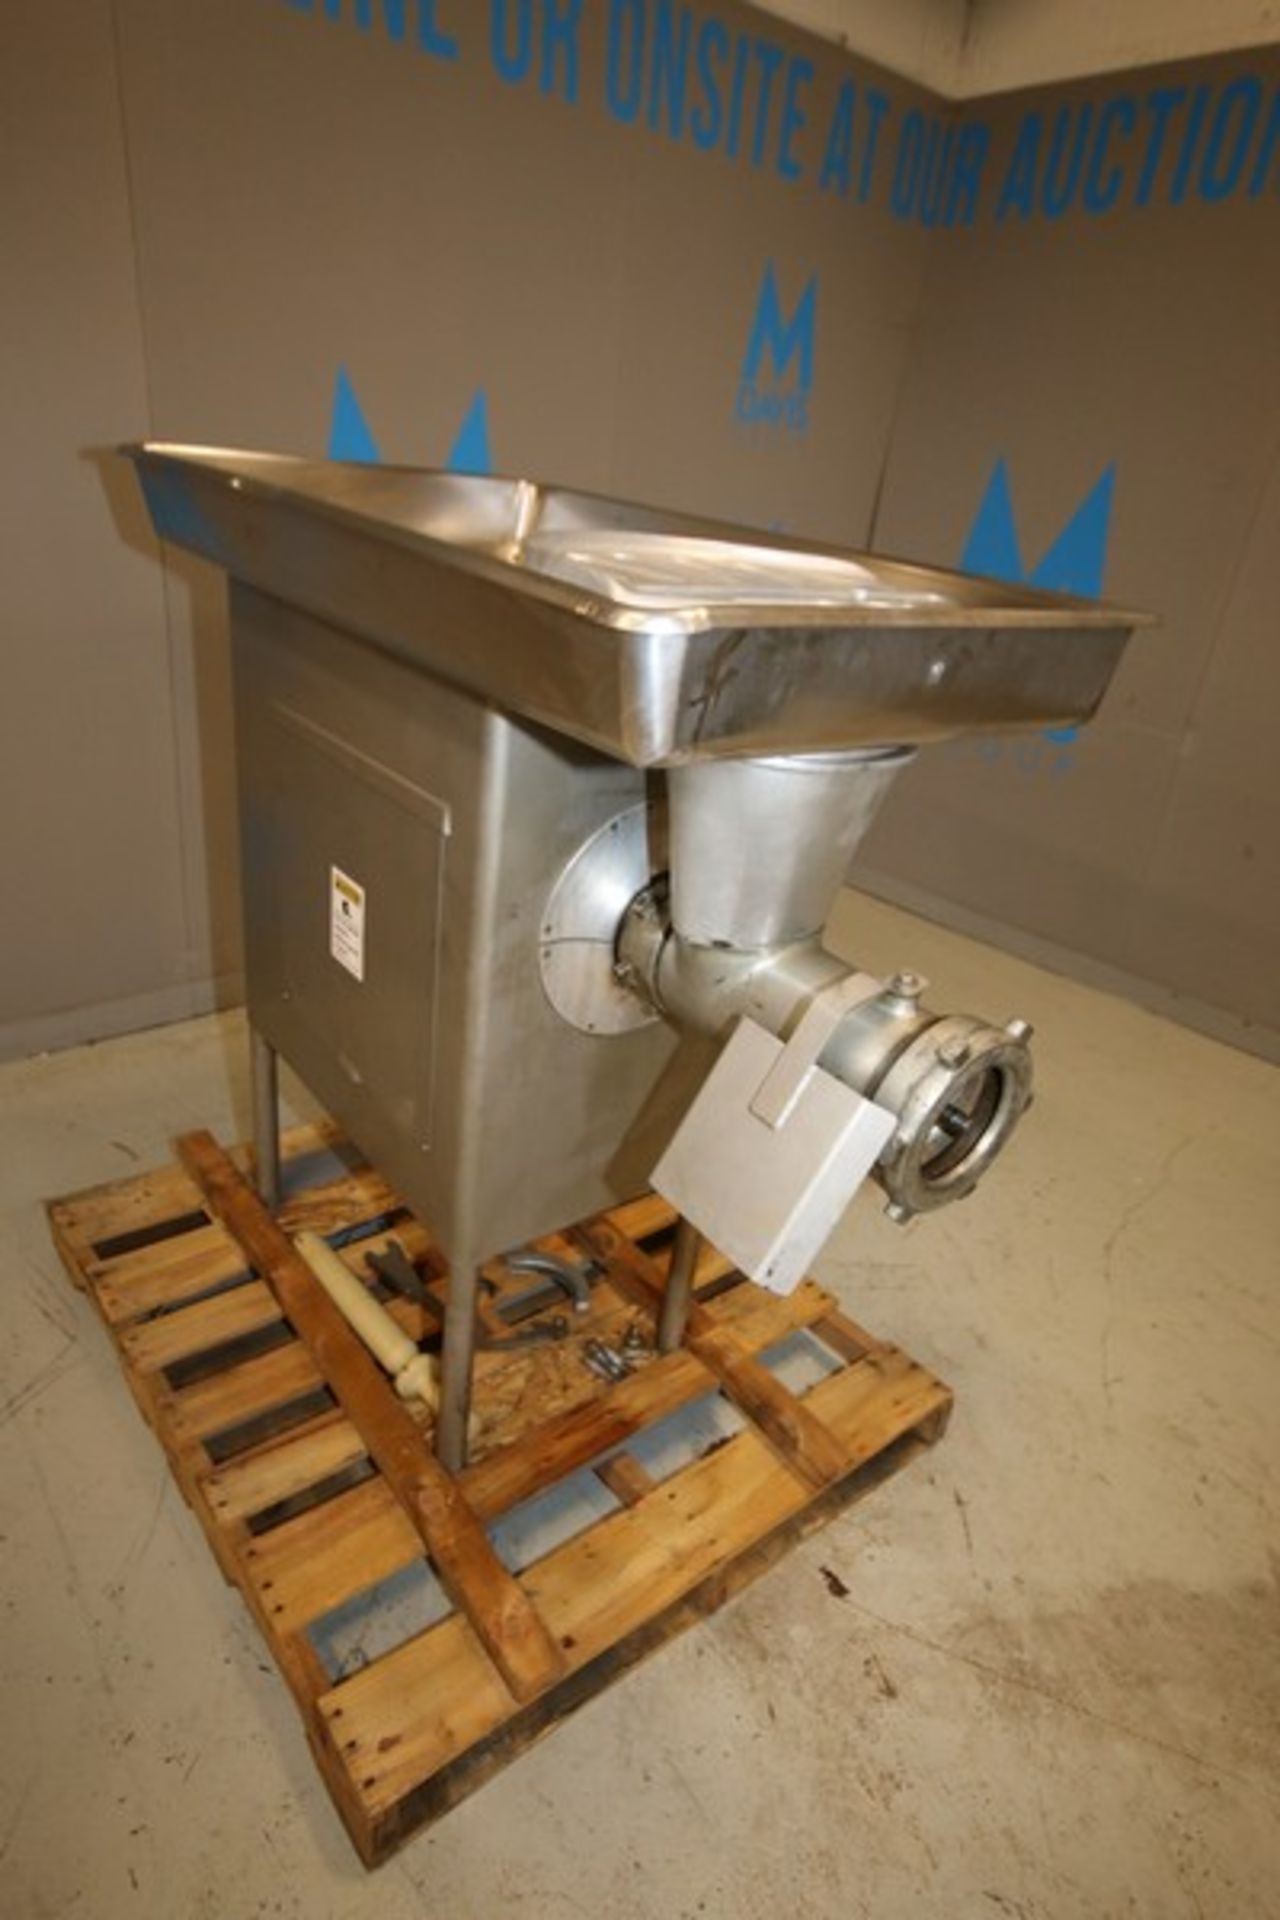 Butcher Boy S/S Floor Grinder, Model A52, SN 17012189, 7.5 hp, 460 V (INV#83499)(Located @ the MDG